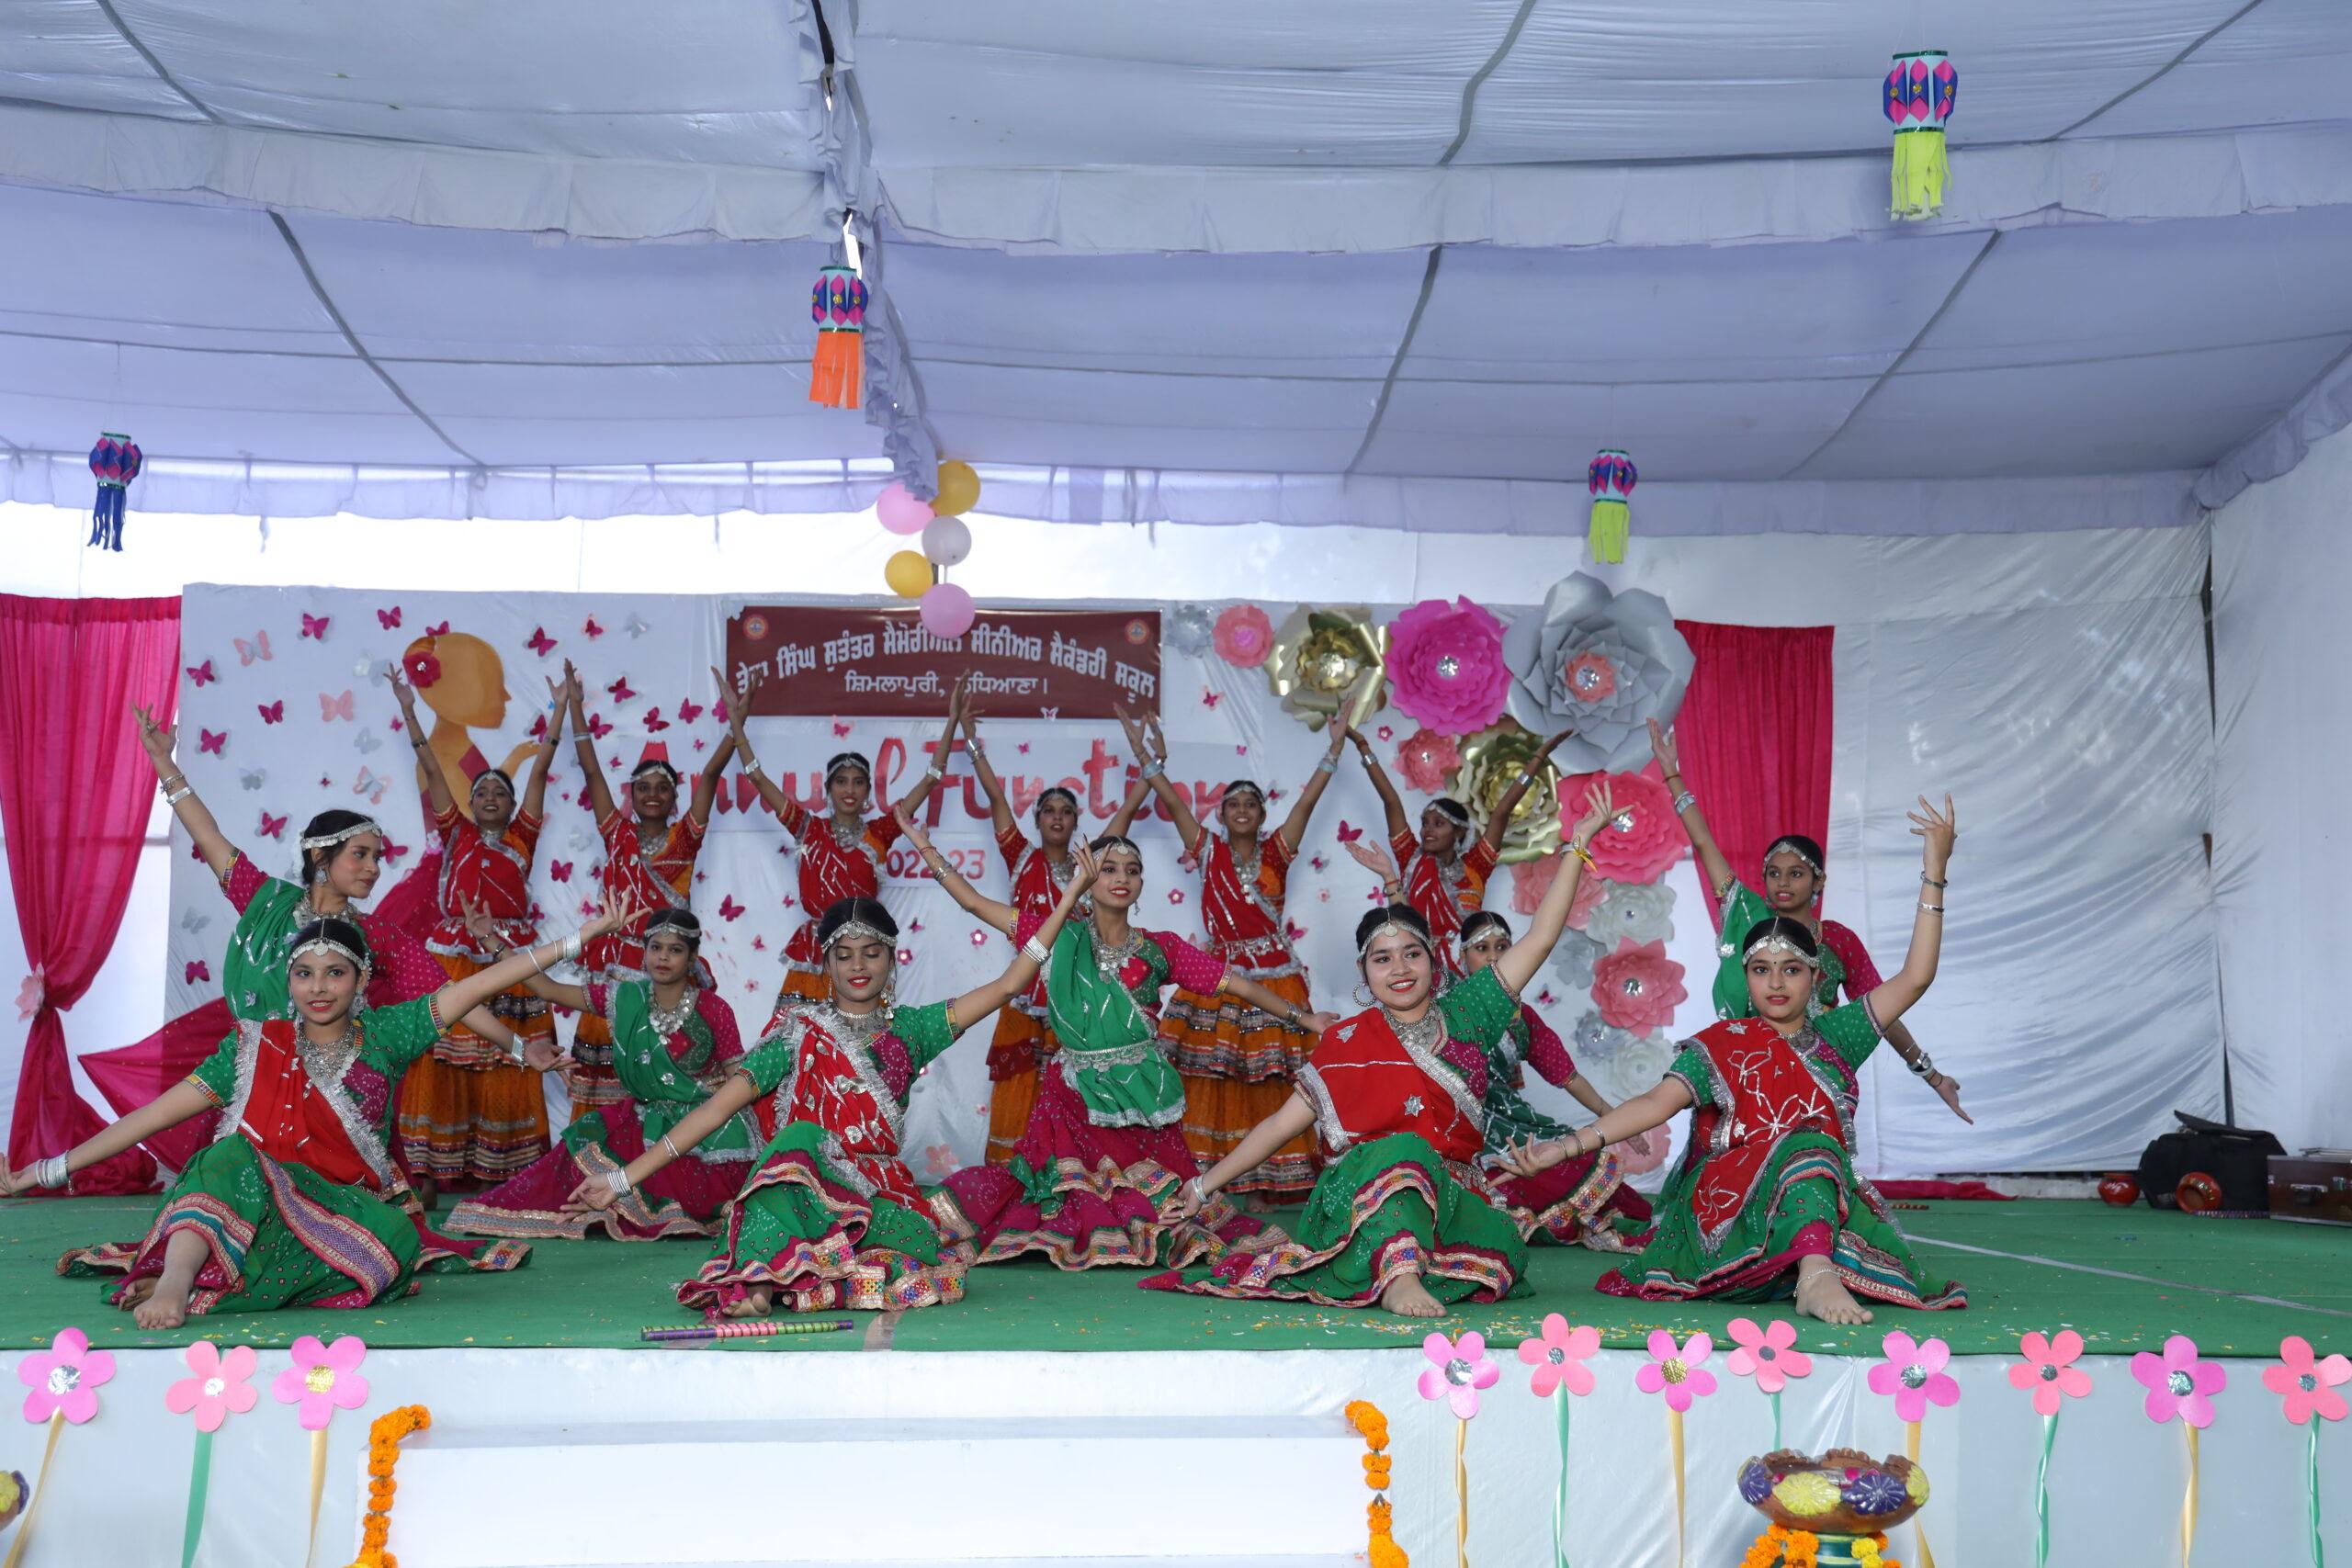 The annual event was celebrated with great fanfare in Teja Singh Independent Memorial School